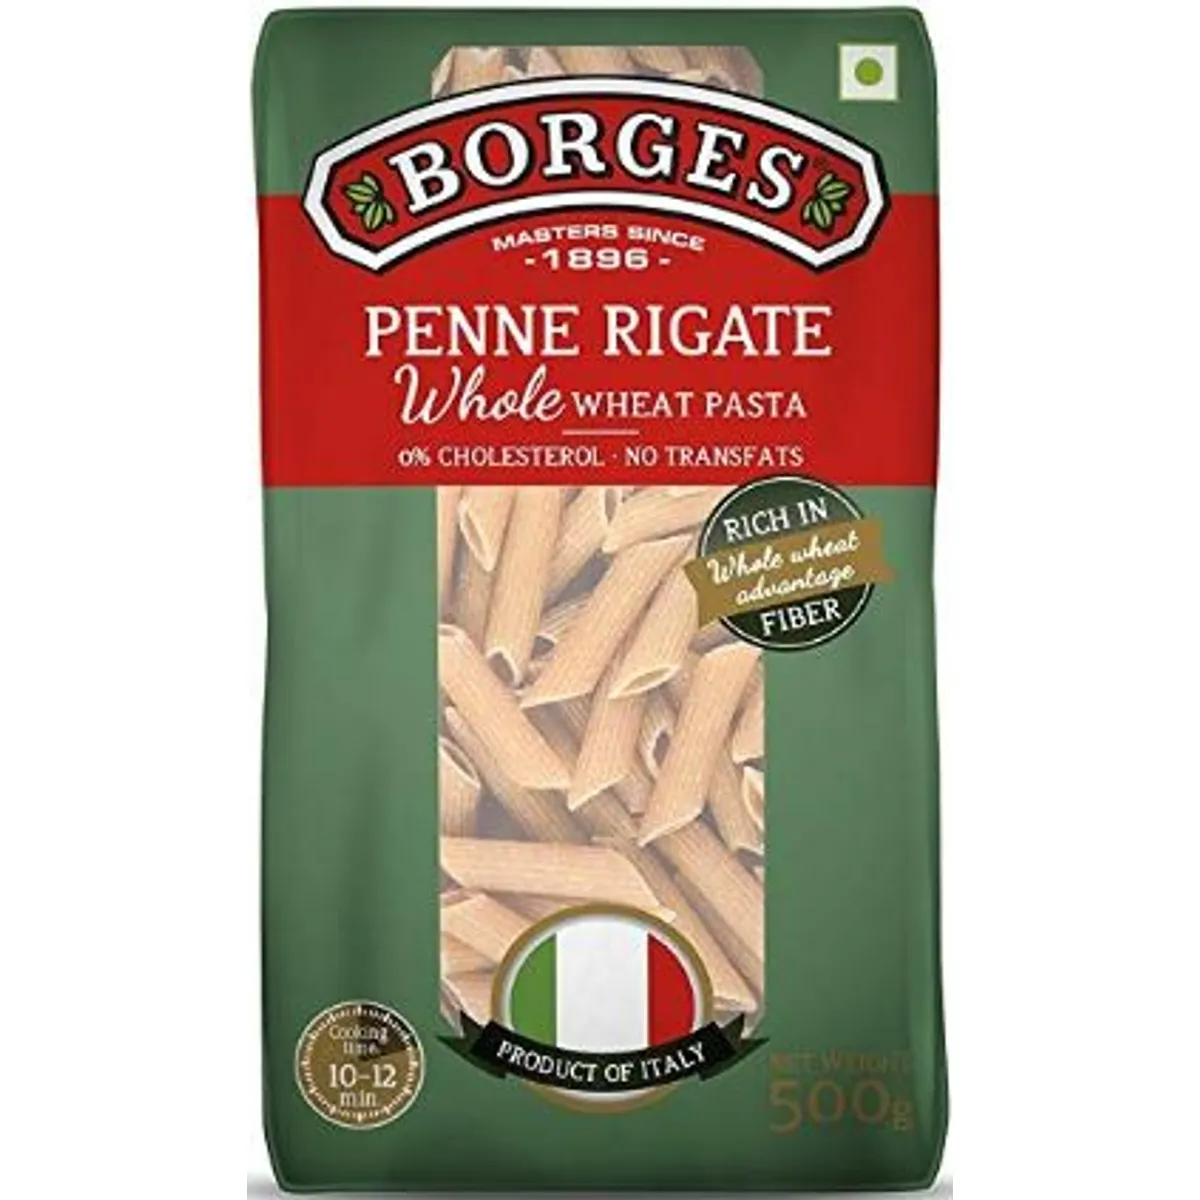 Borges Whole Wheat Penne Pasta )BUY 1 GET 1)